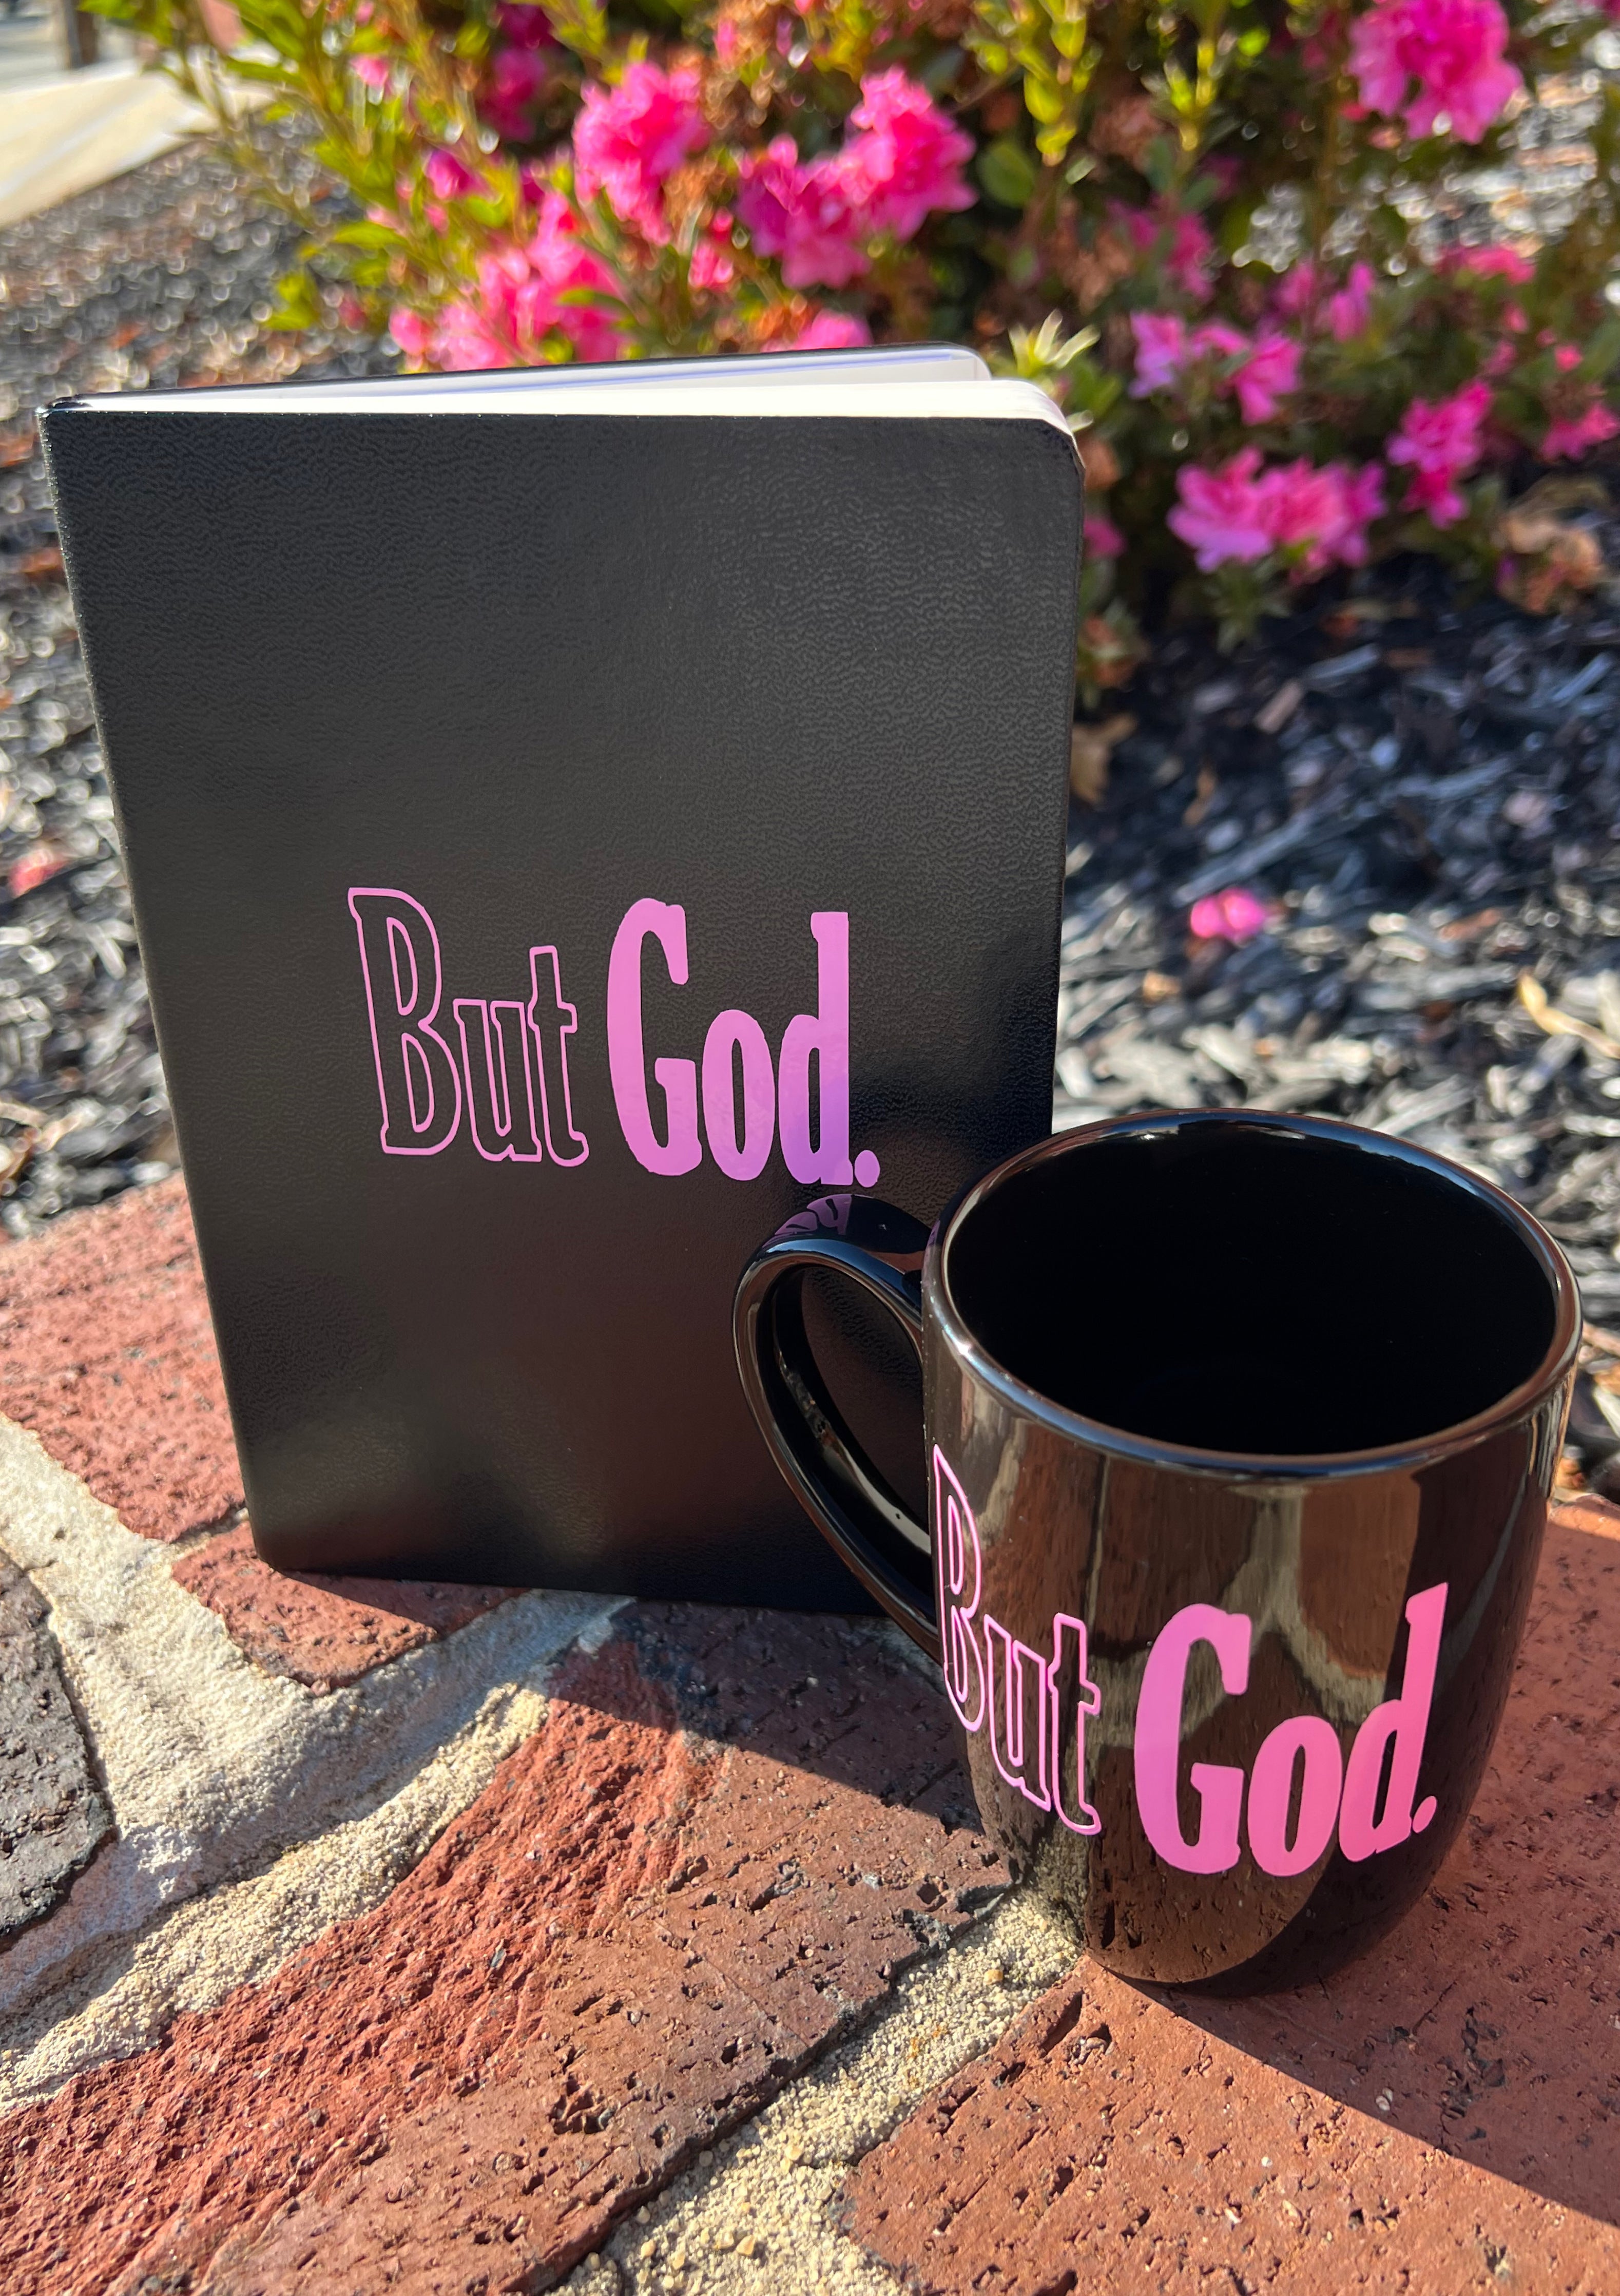 ButGod Journal & Mug Gift Set - Pink - Jewellery Unique Gifts & Accessories